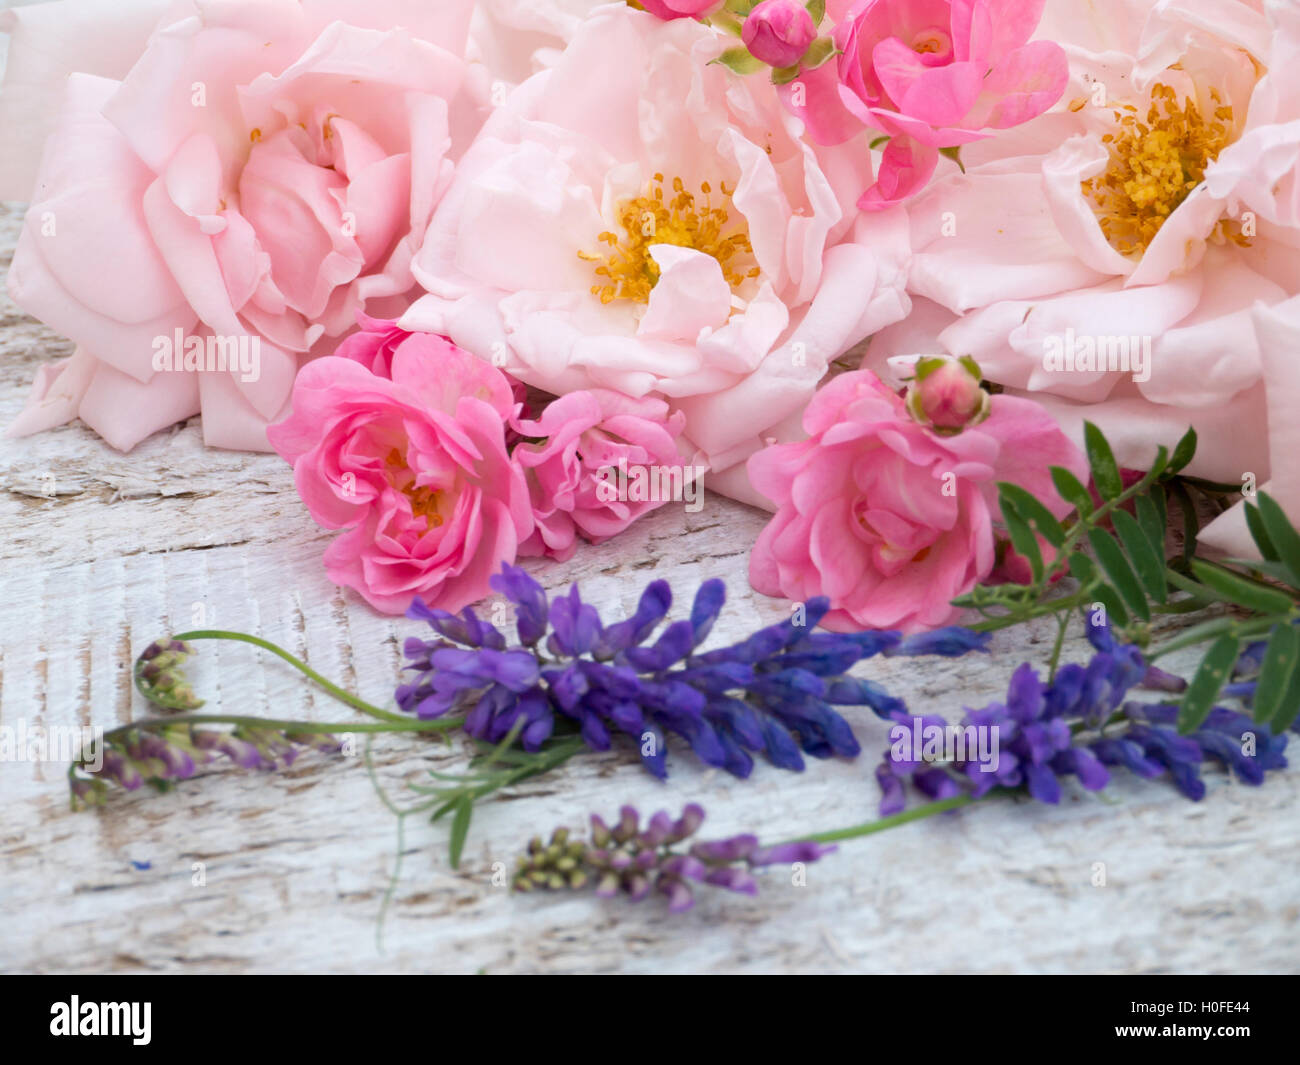 Pale pink and bright pink roses and tufted vetch on the white rough wooden table Stock Photo